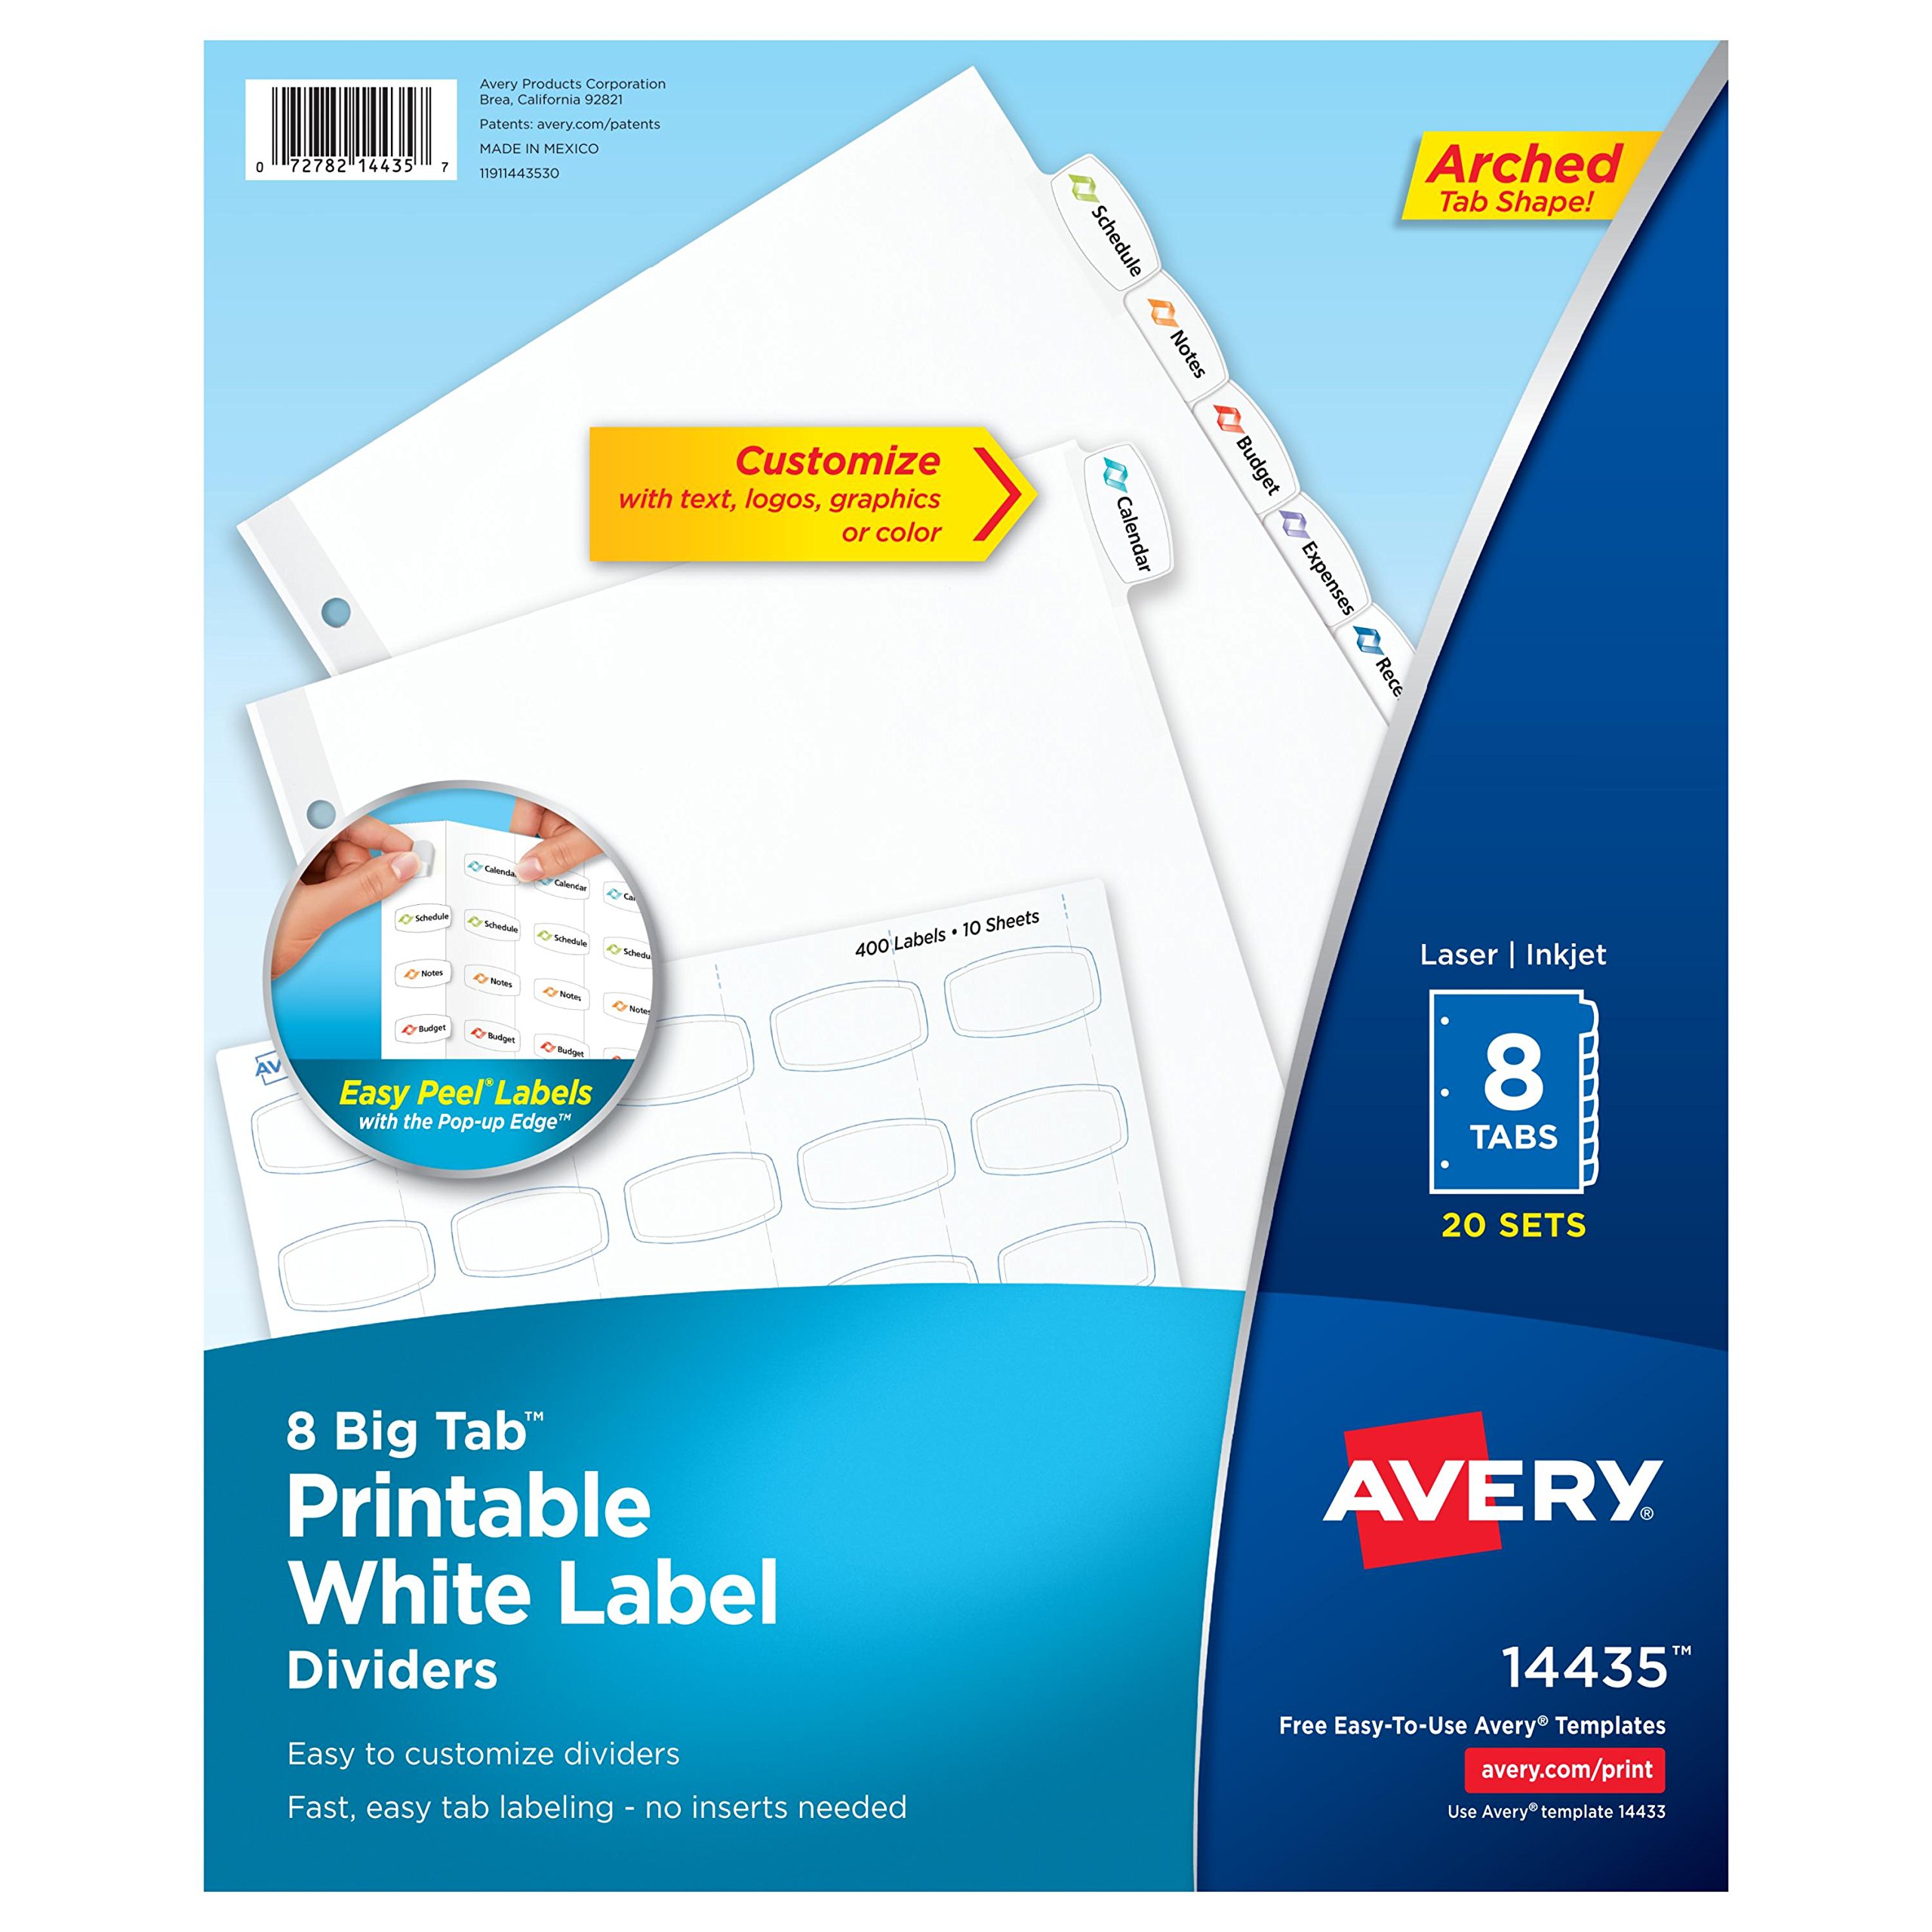 Avery Big Tab Printable White Label Dividers with Easy Peel, 8 Tabs, 20 Sets (14435)